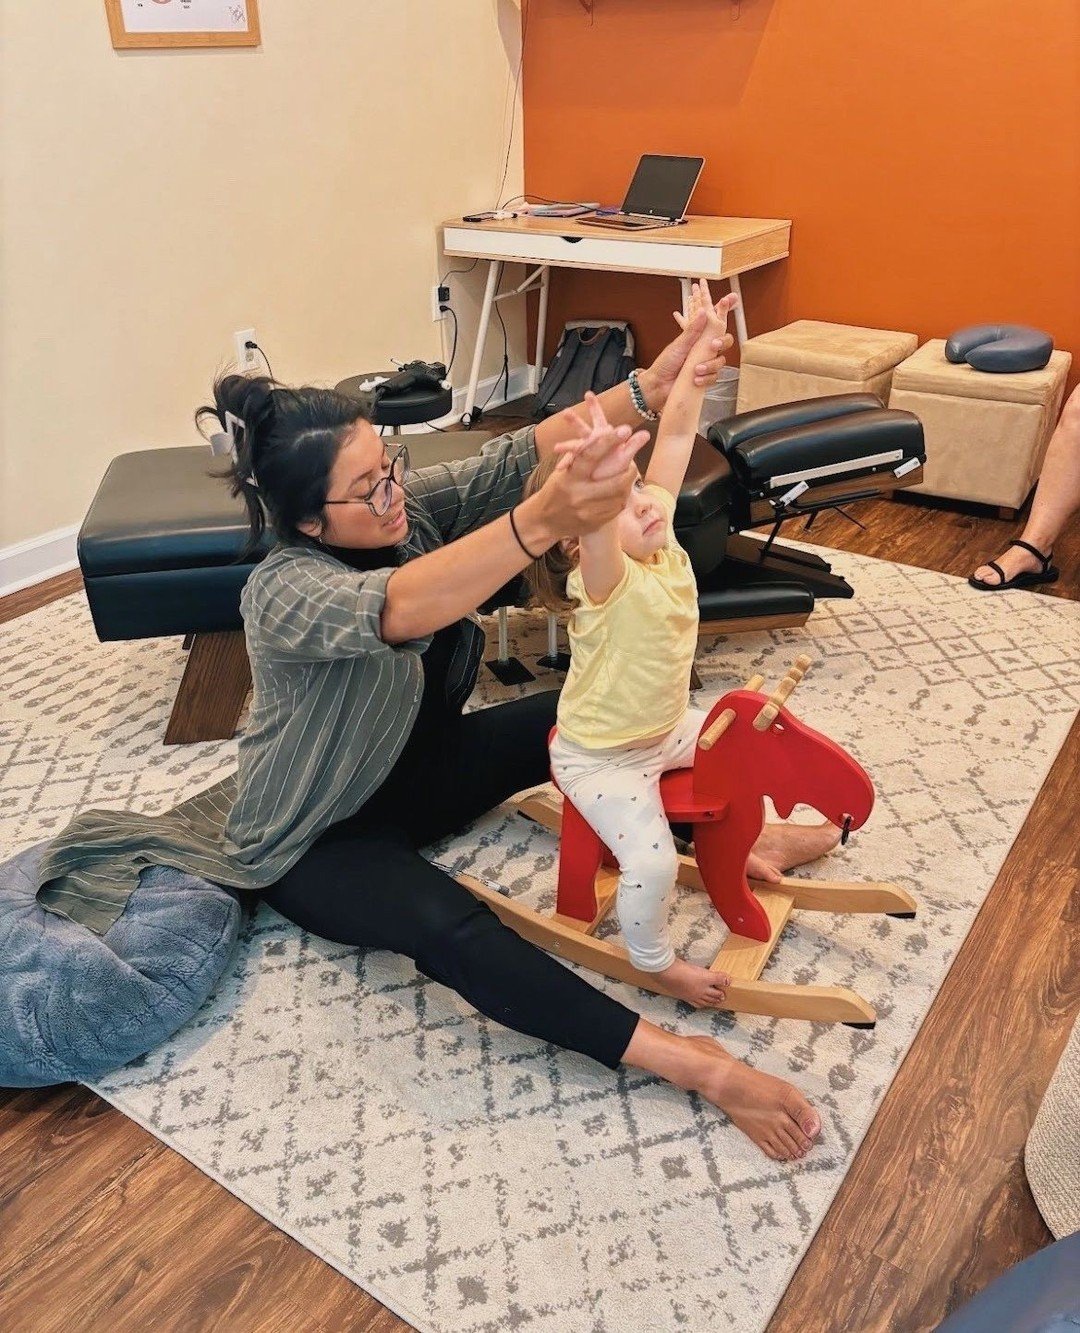 Nurturing Little Ones: Supporting Developmental Milestones through Pediatric Chiropractic Care⁠
⁠
SETTING THE FOUNDATION⁠
⁠
From the moment they enter the world, until the age of 5, our children's bodies and nervous systems undergo rapid growth and t